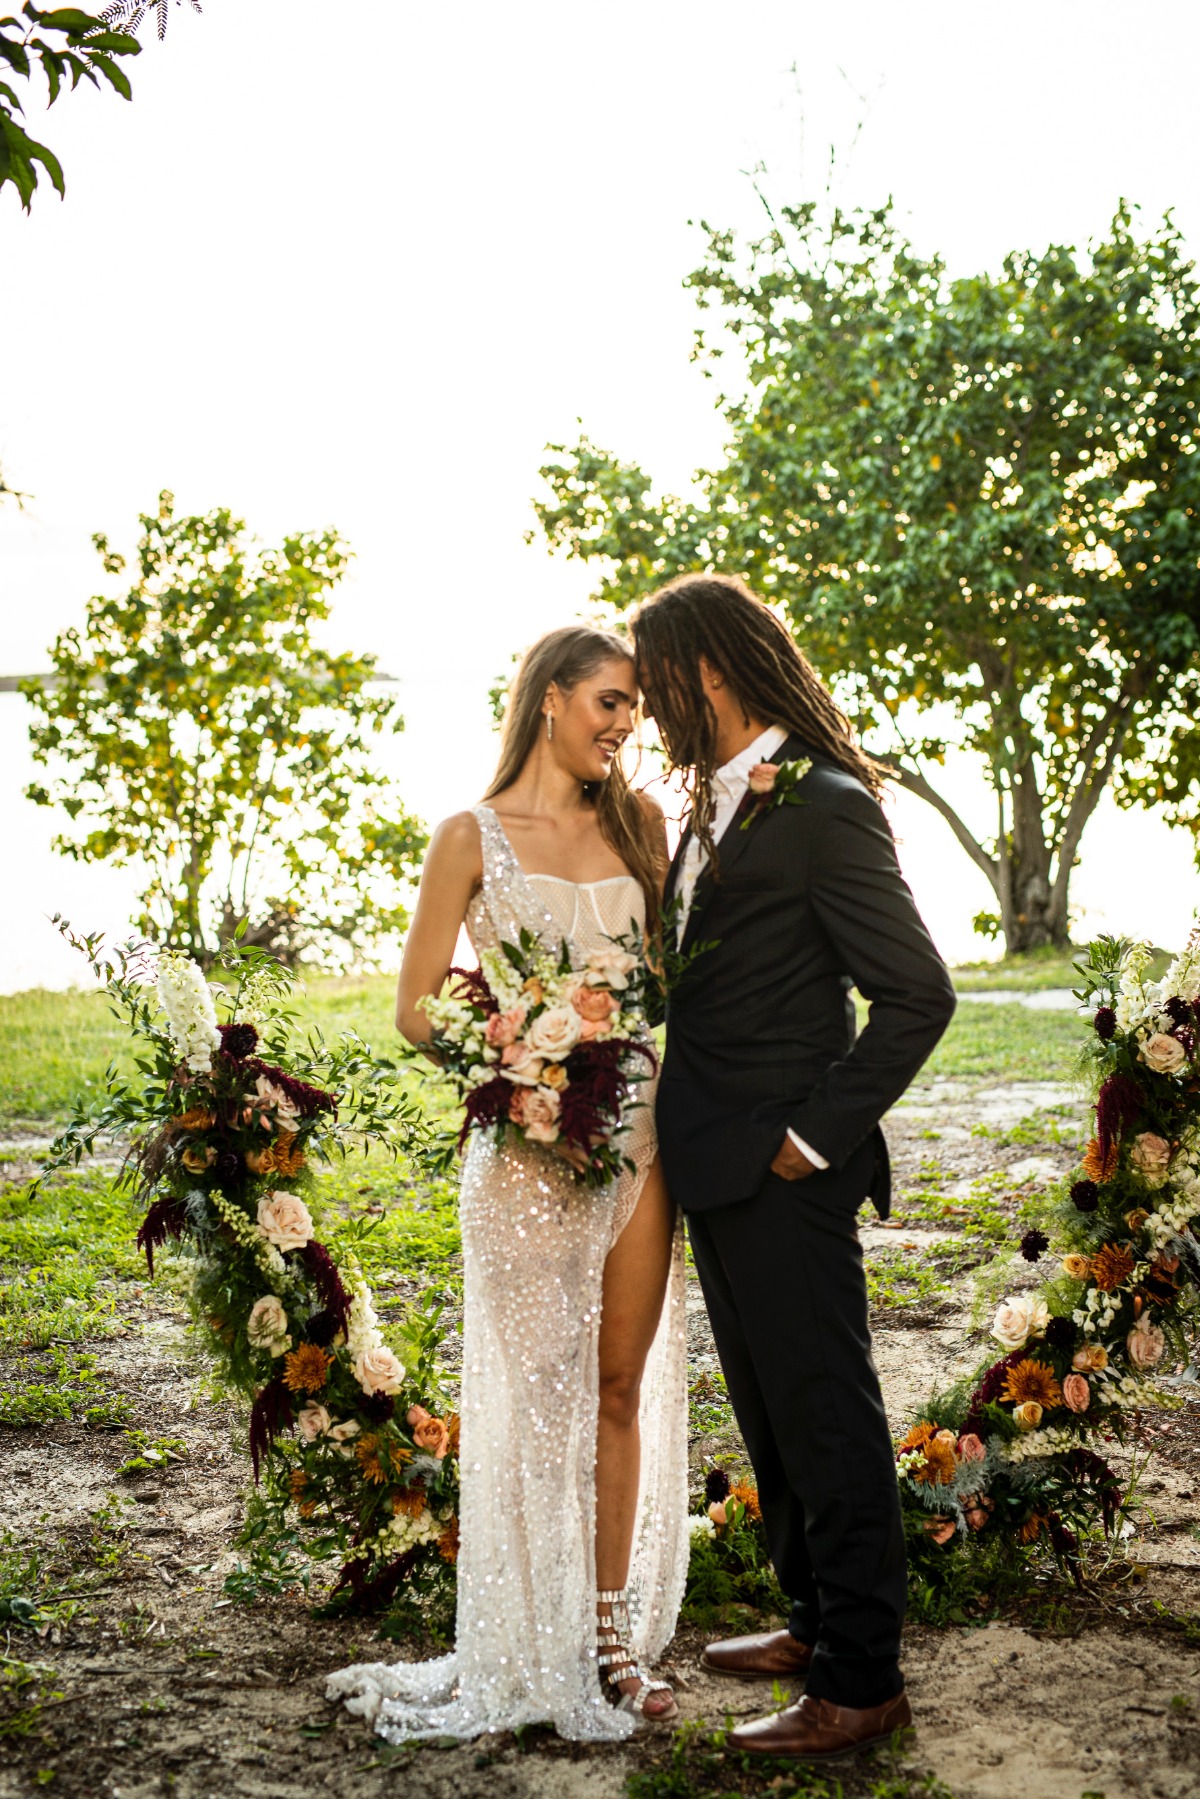 Add A Little Spice To Your Day With This Vibrant Caribbean Styled Shoot